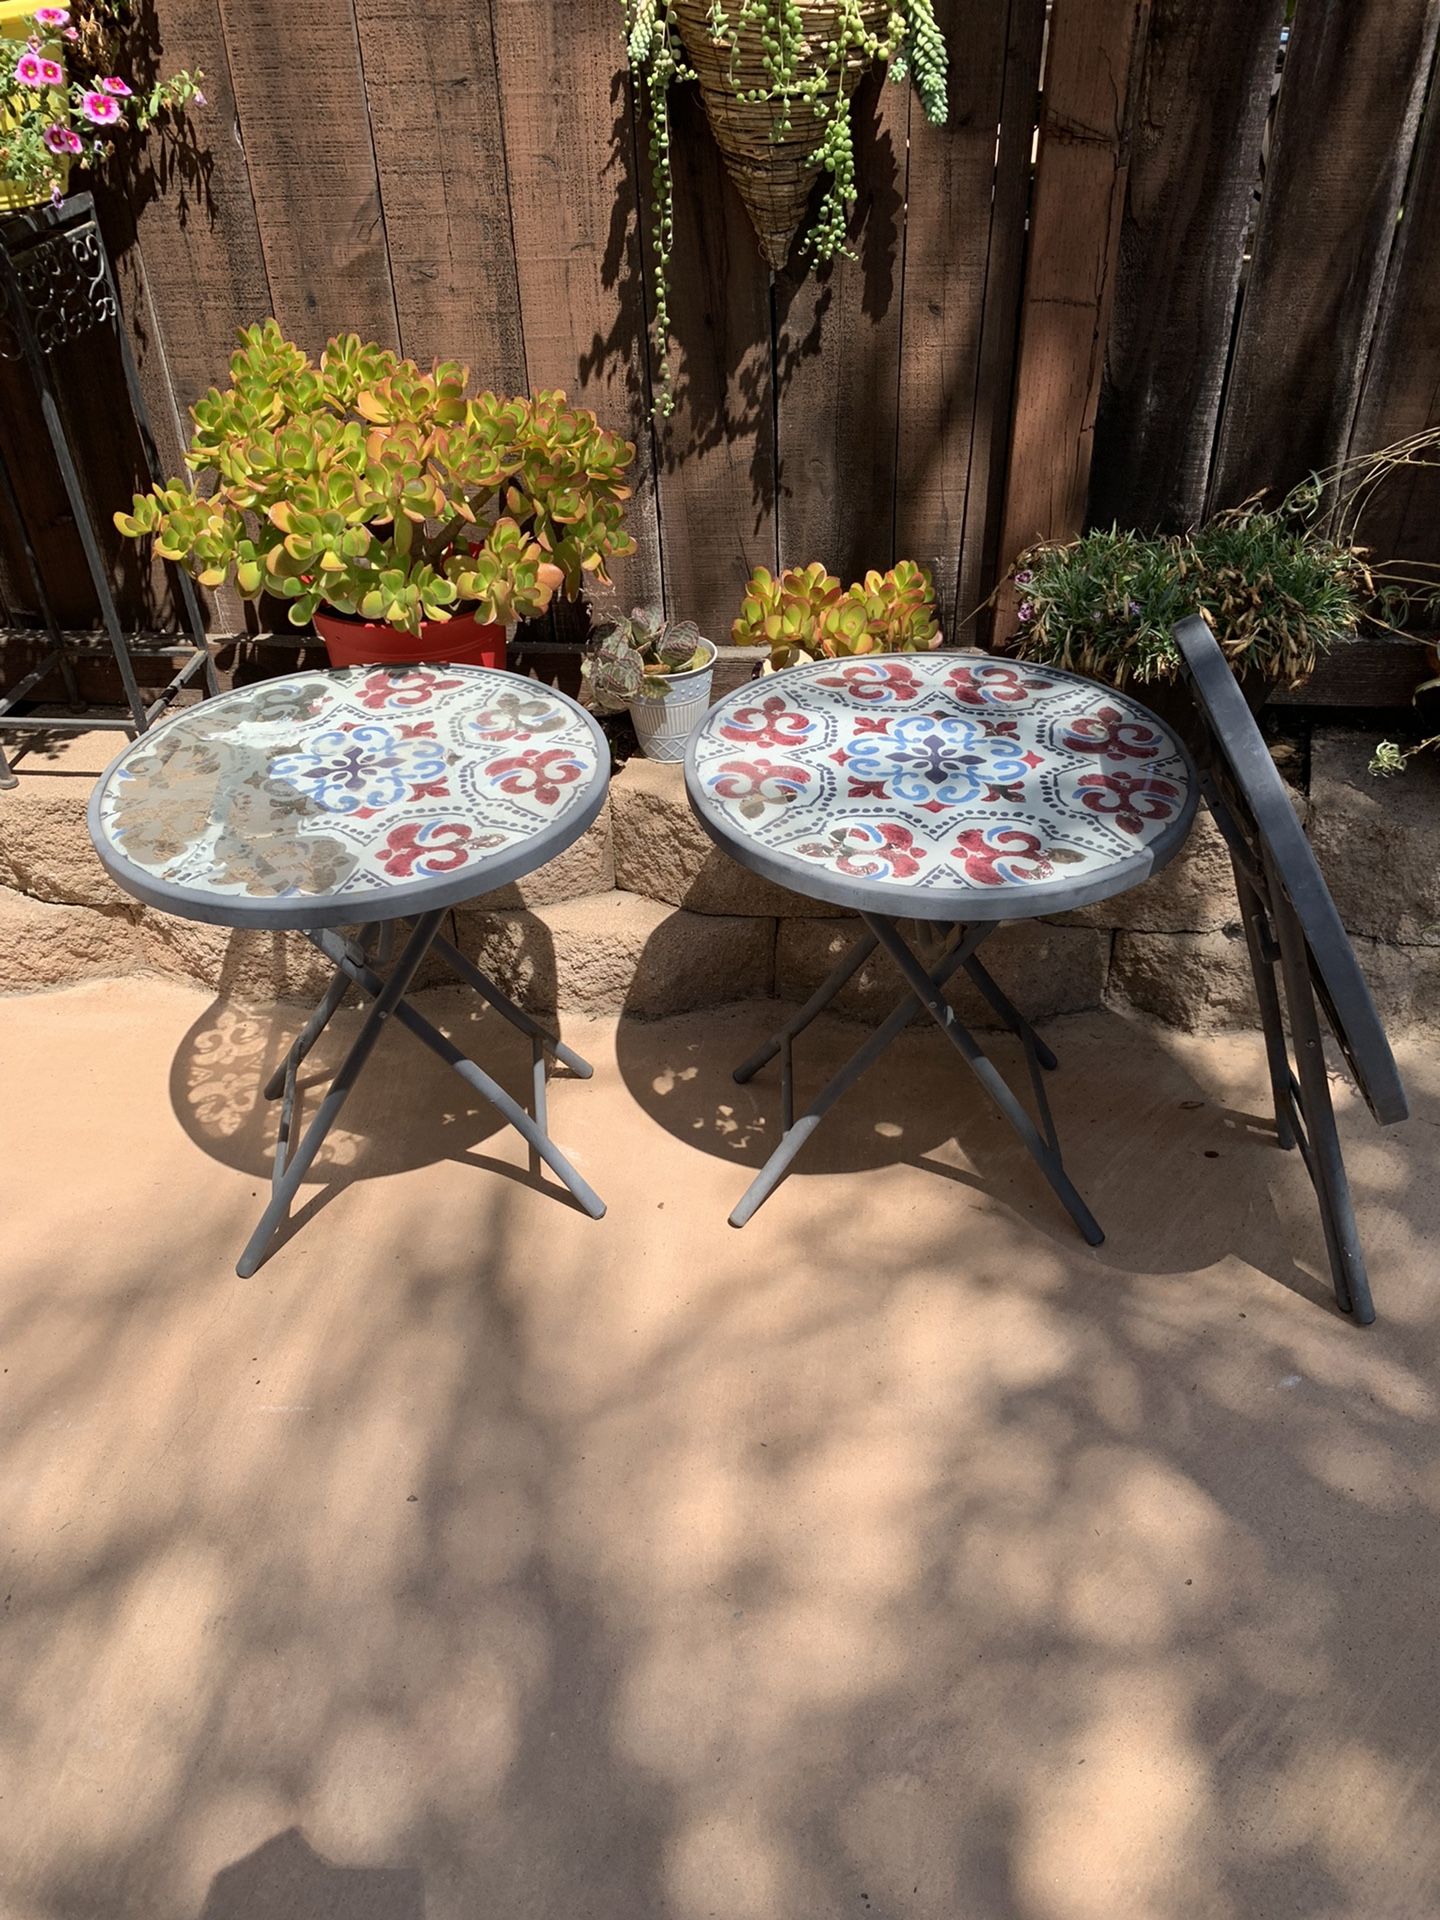 3 Foldable Patio Tables Pick Up 92127